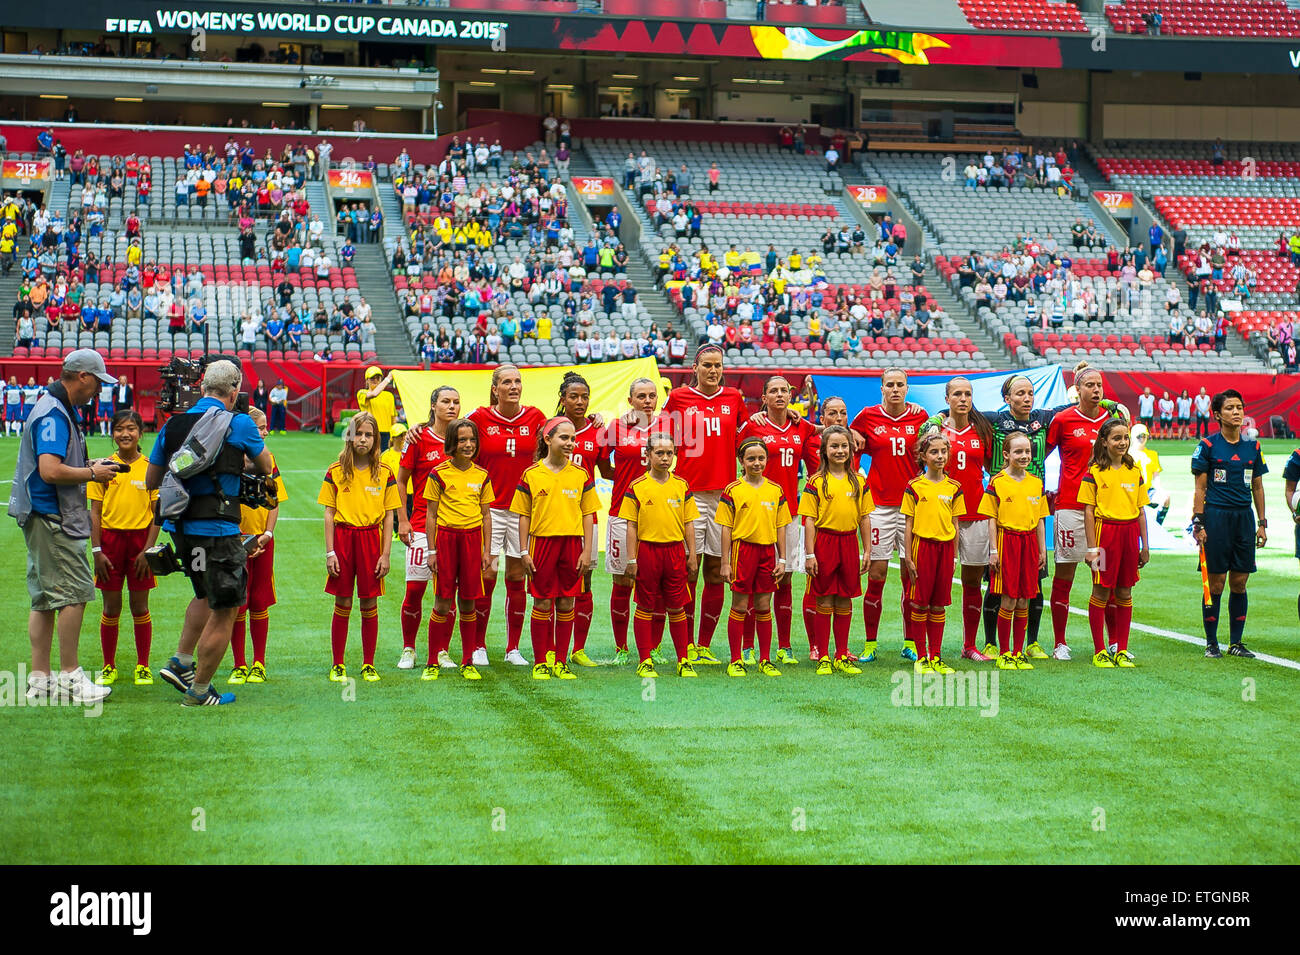 Vancouver, Canada - June 12, 2015: Team Switzerland lined up for the national anthems during the opening round match between Switzerland and Ecuador of the FIFA Women's World Cup Canada 2015 at BC Place Stadium. Switzerland won the match 10-1. Stock Photo